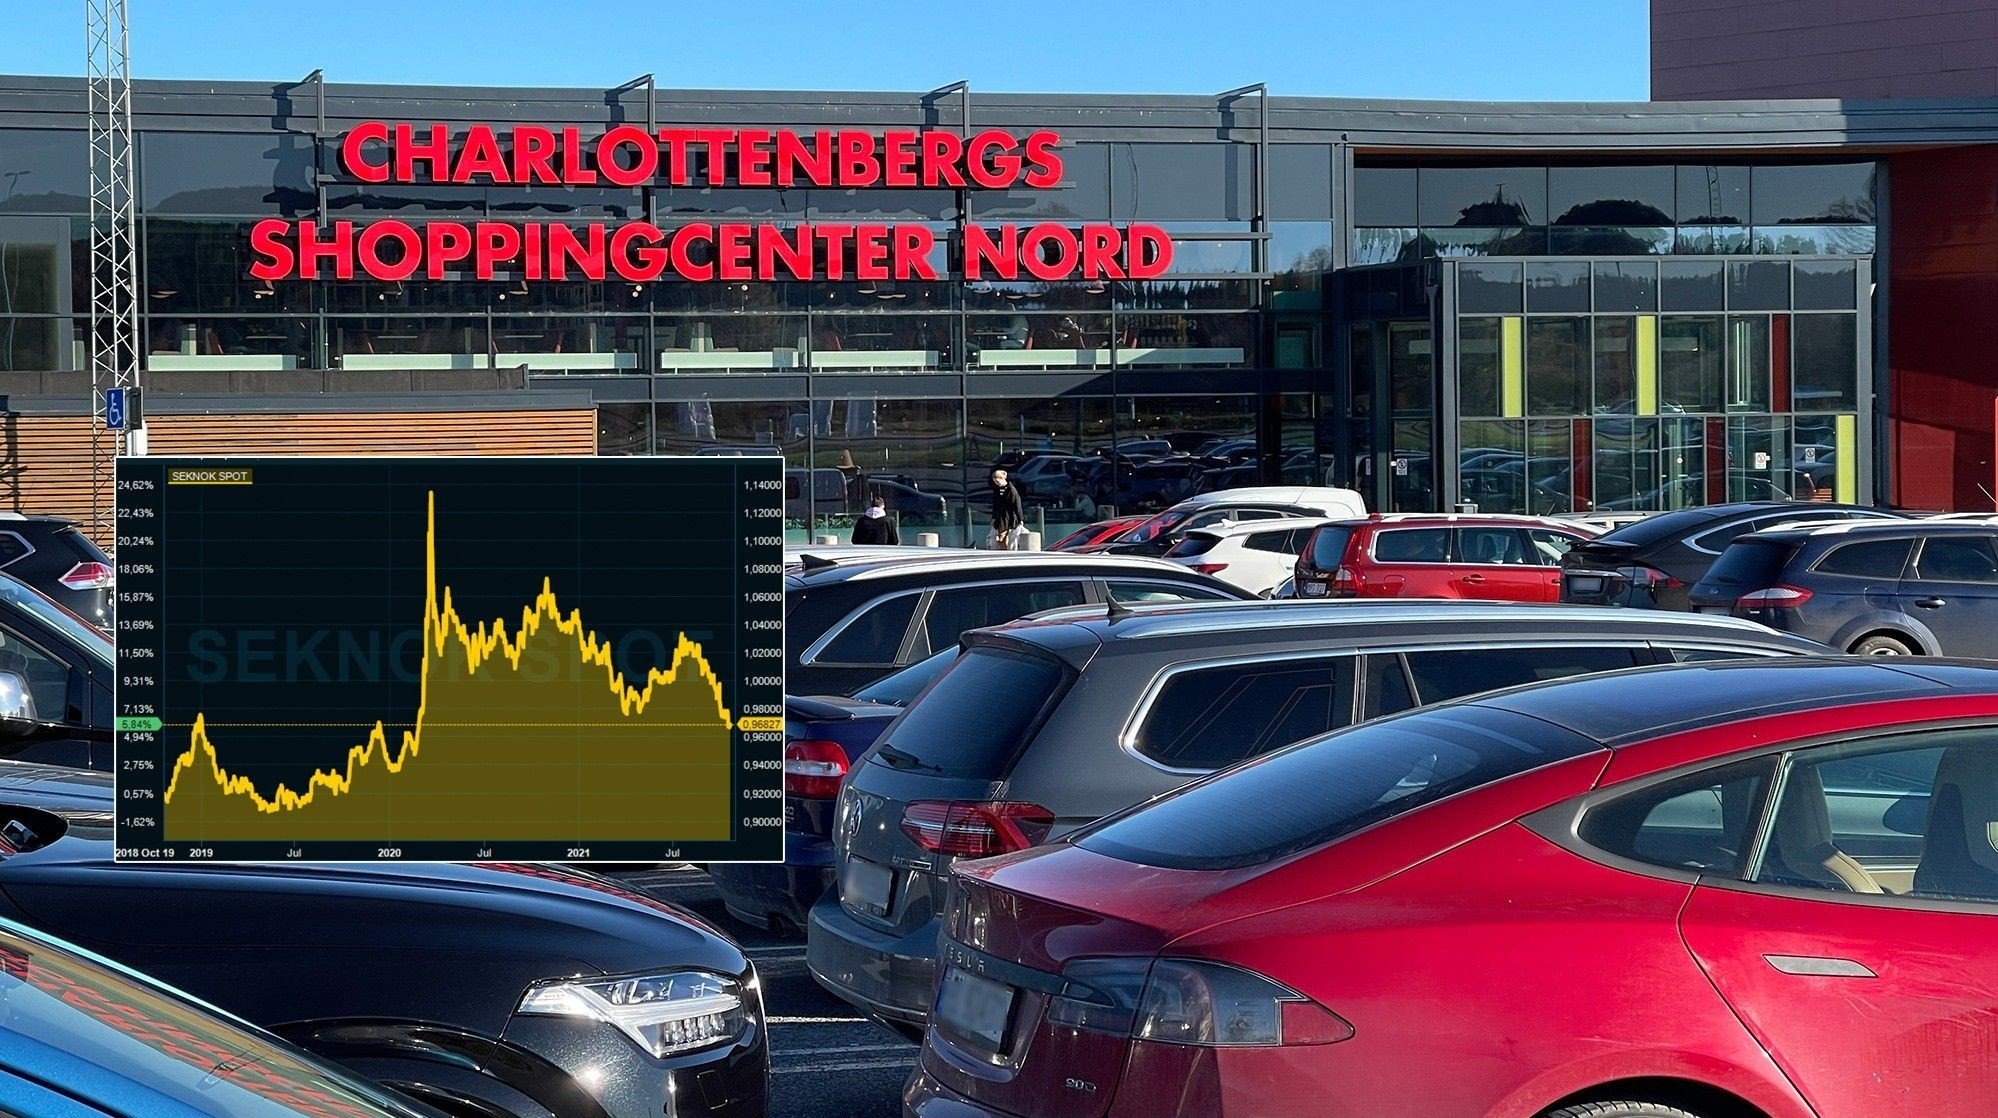 Kronekurs, DNB |  Strong Crone effect for Norwegians: - More to worry about